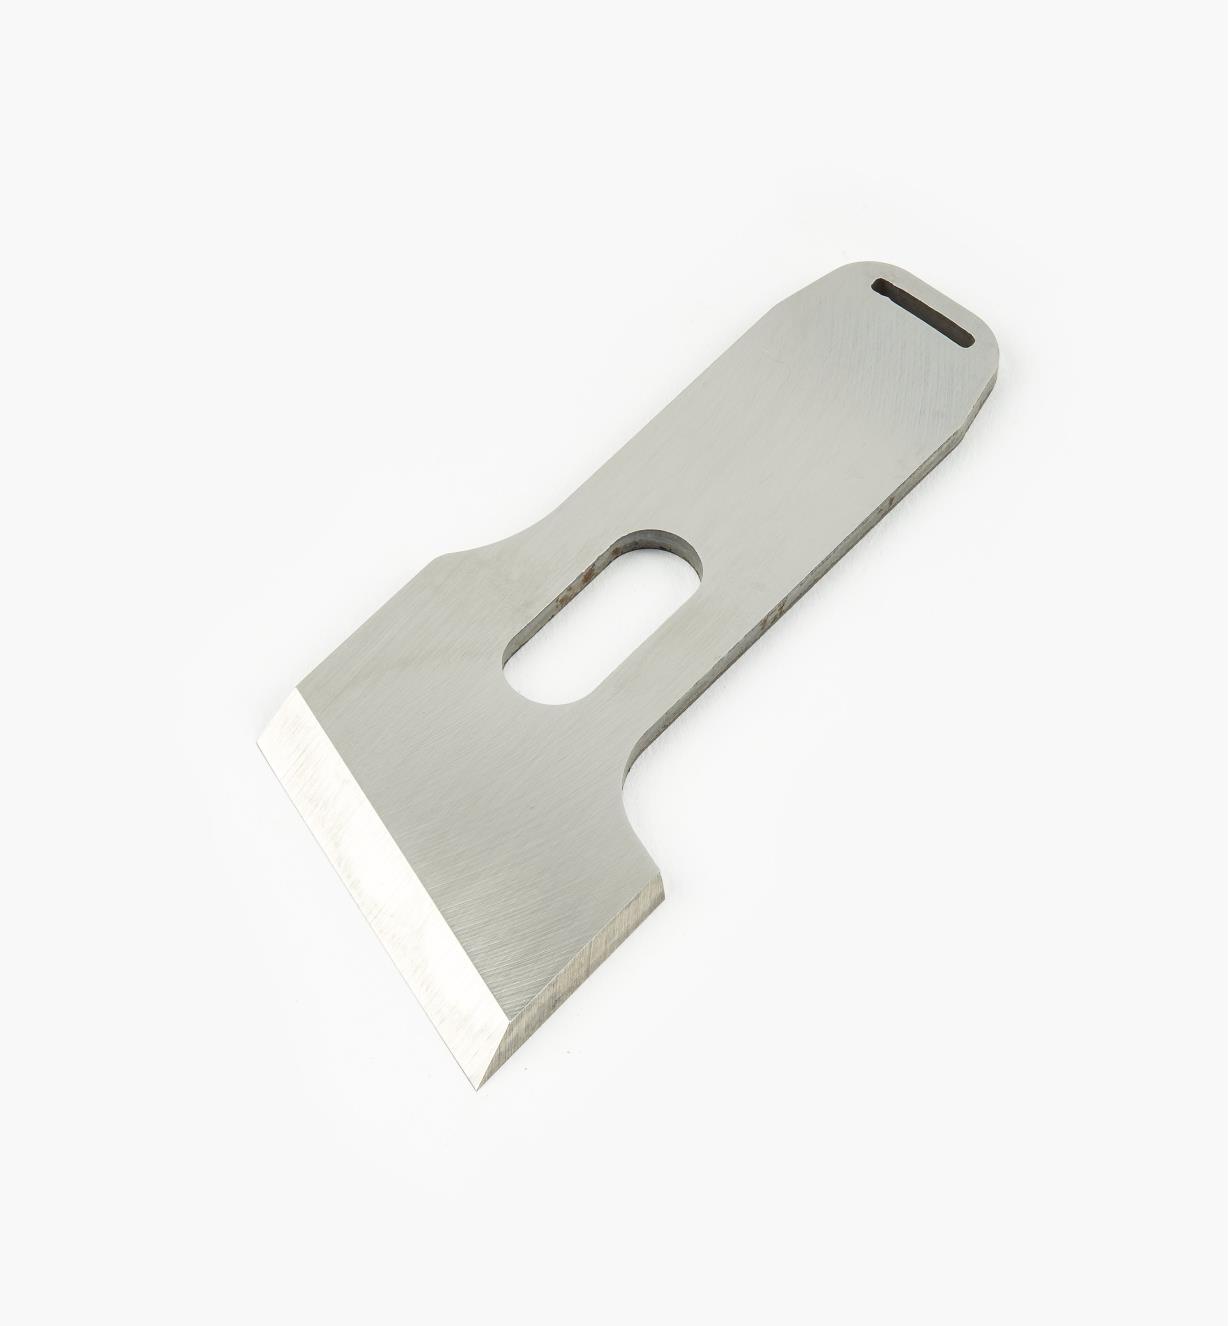 05P4551 - Replacement A2 Blade, RH